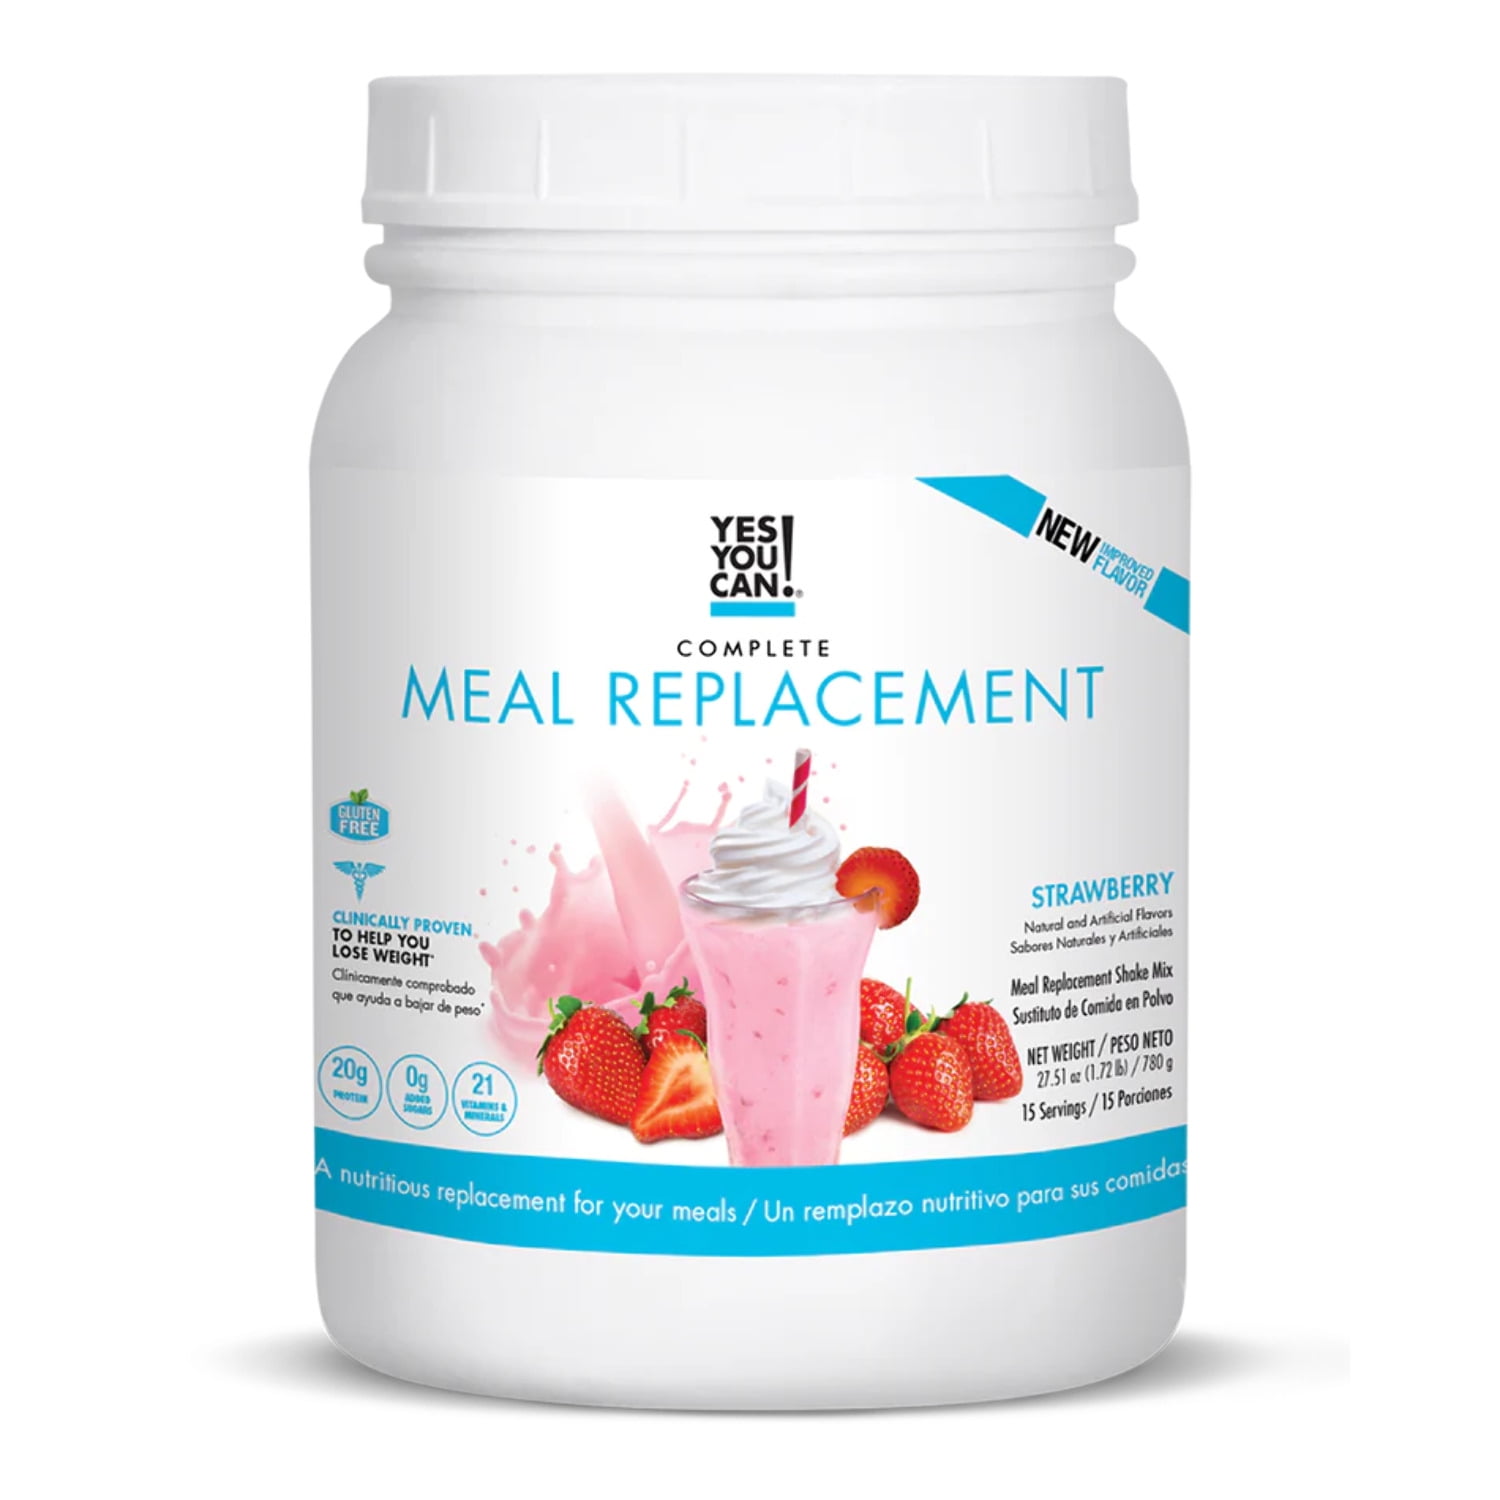 Yes You Can! Complete Meal Replacement - 30 Servings, 20g of Protein, 0g  Added Sugars, 22 Vitamins and Minerals - All-in-One Nutritious Meal